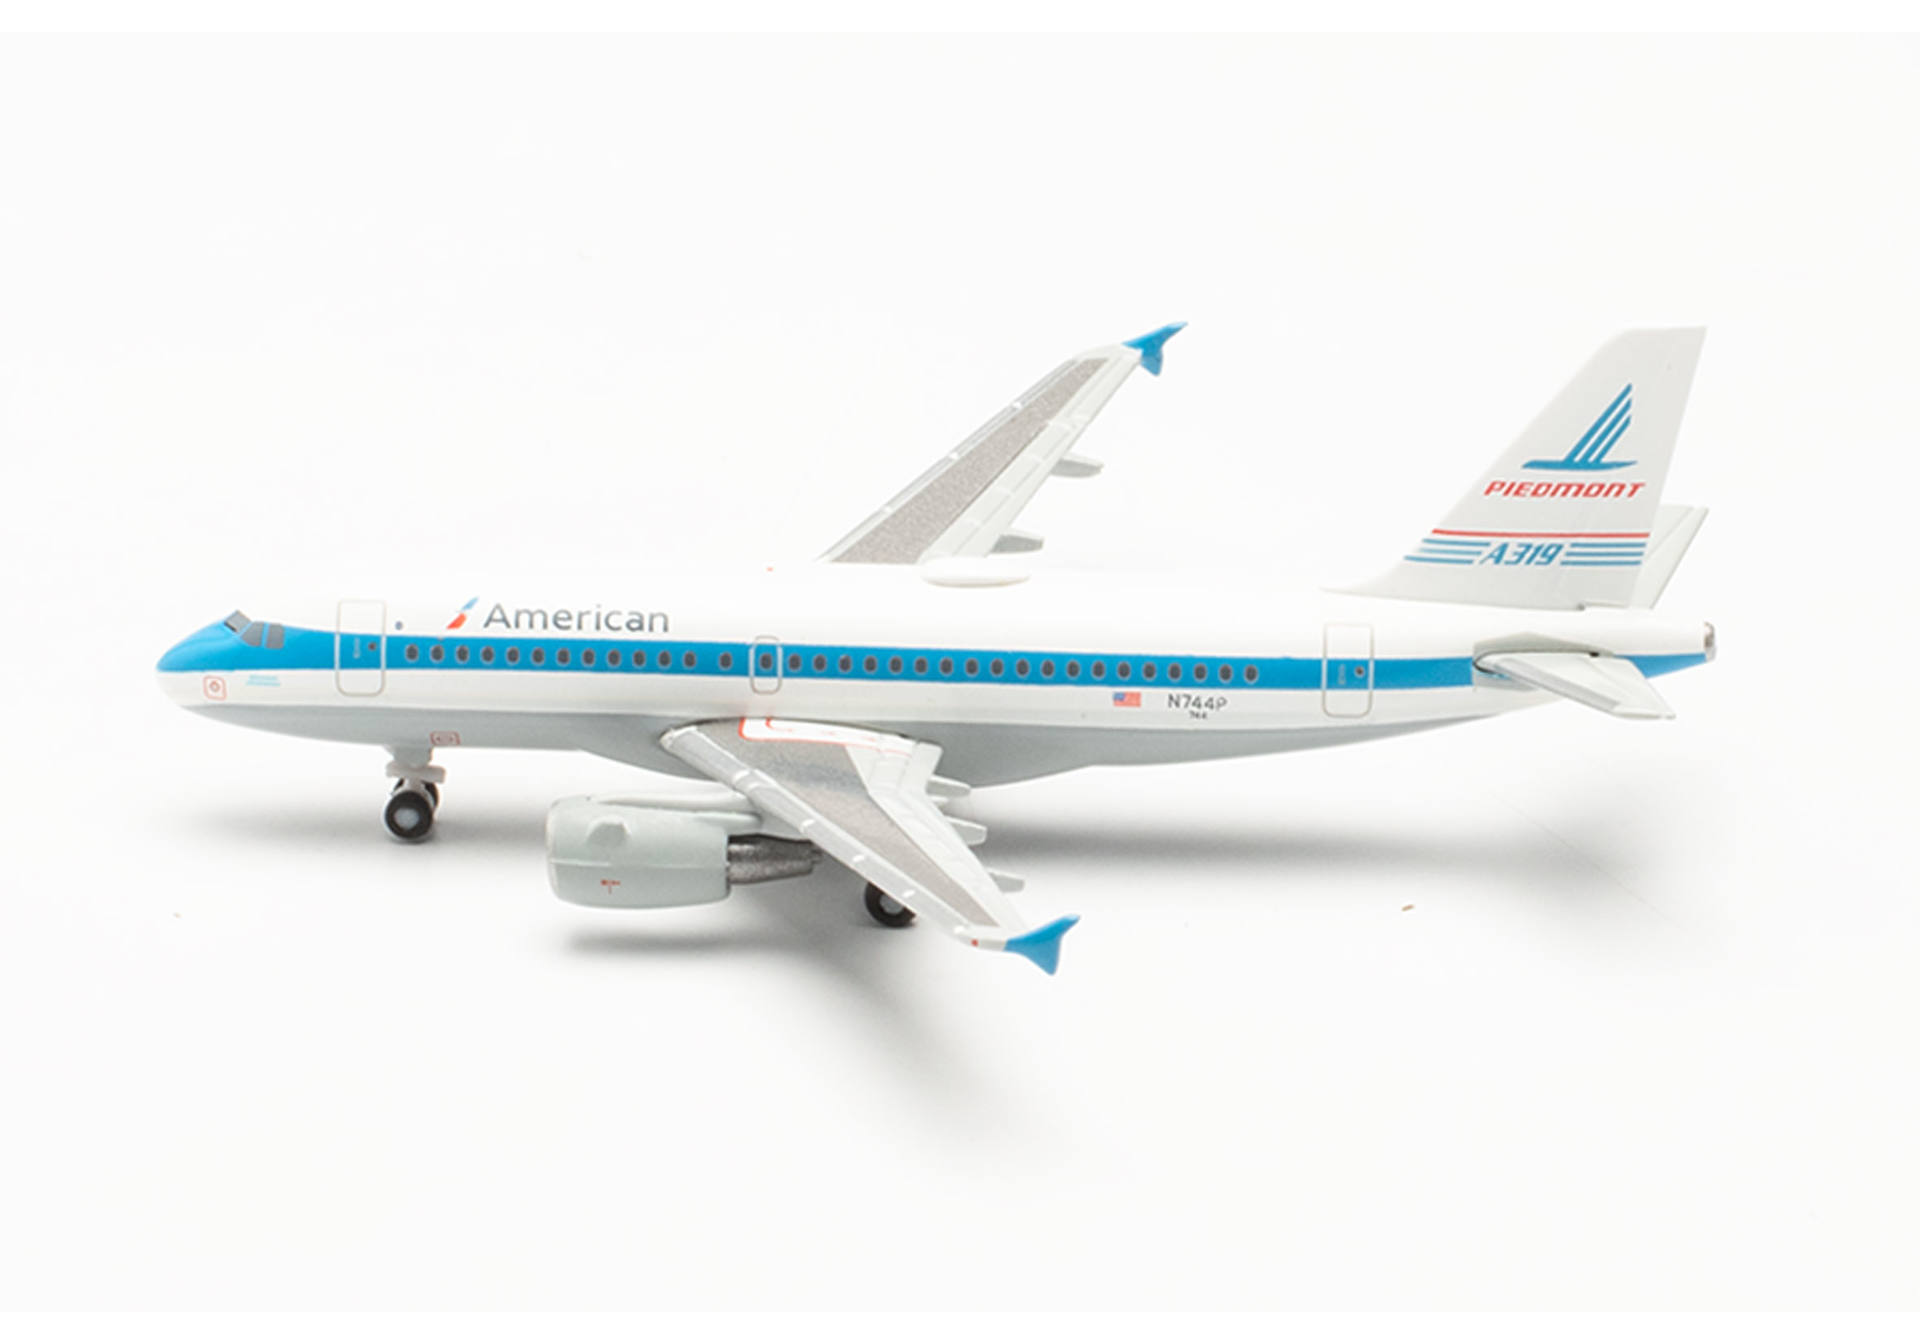 American Airlines Airbus A319 - Piedmont Heritage livery – N744P “Piedmont Pacemaker”